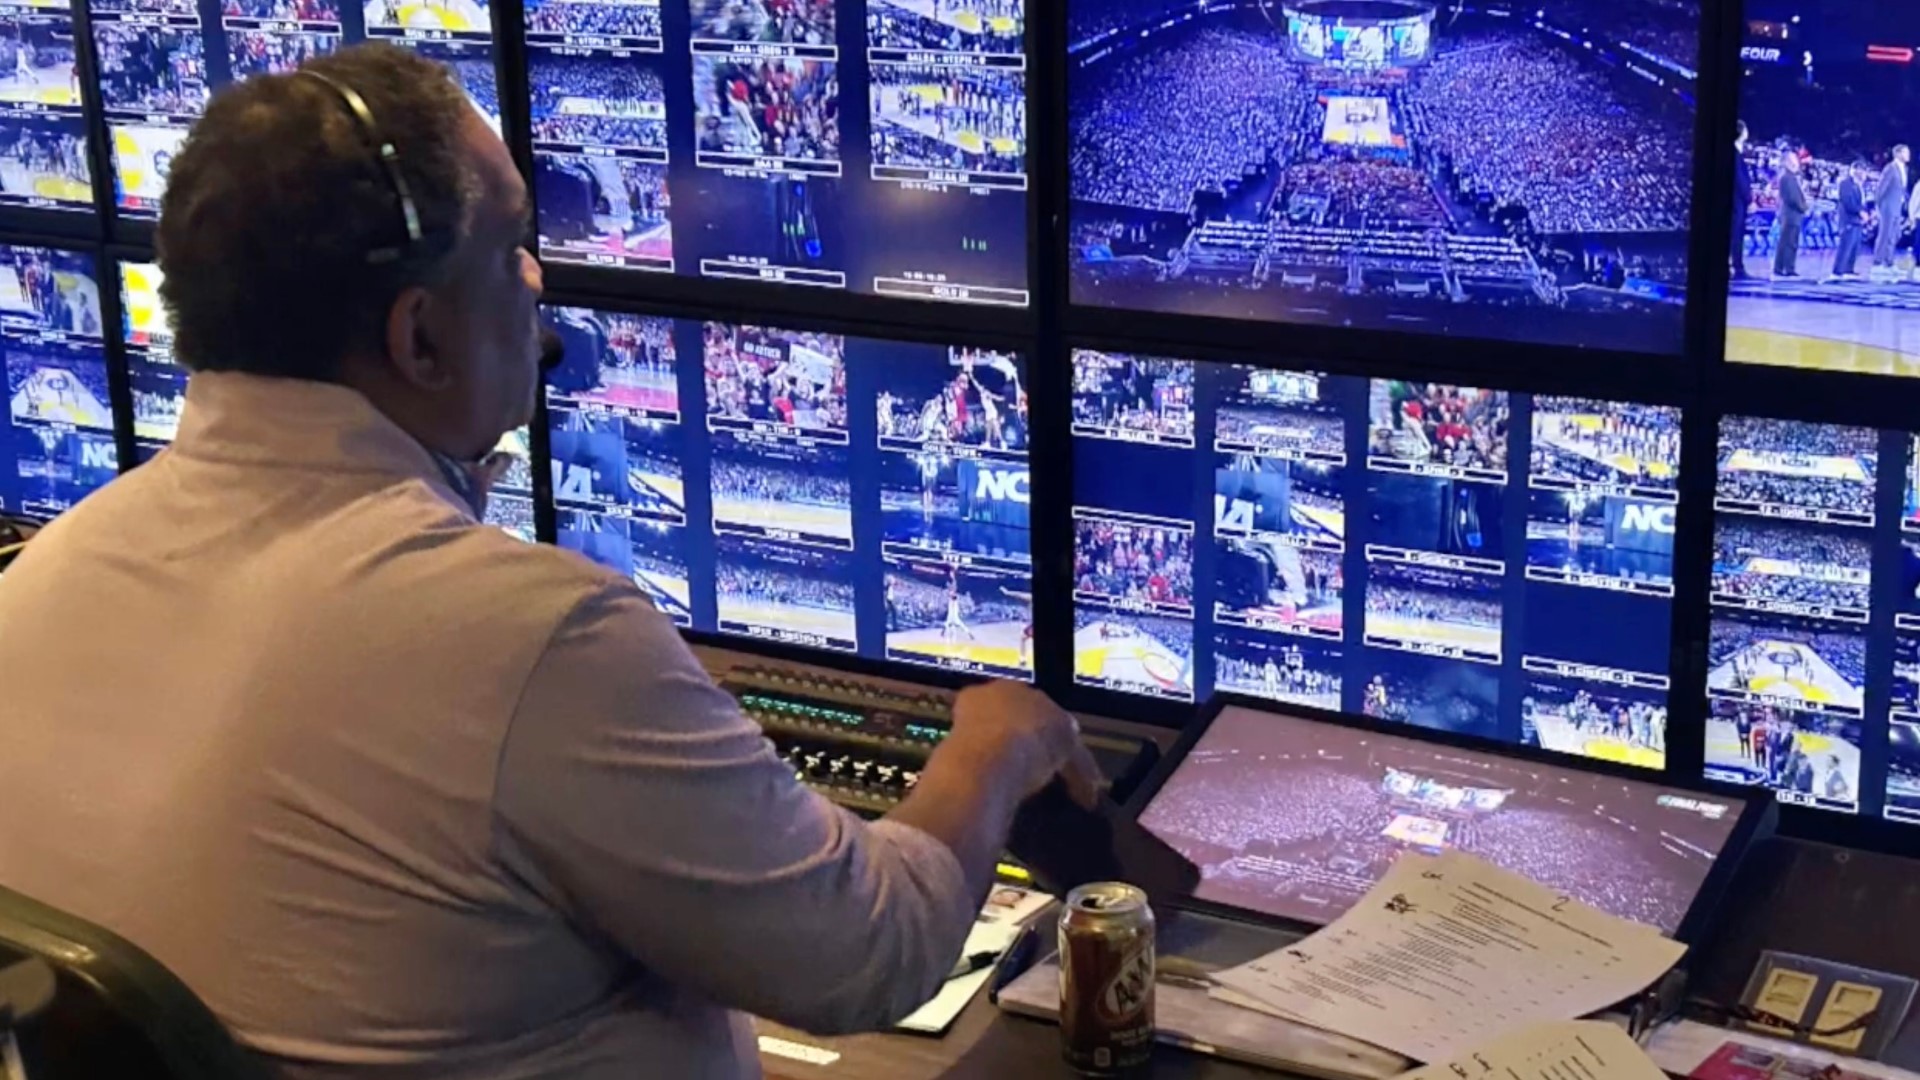 For the first time, CBS will have a person of color directing Monday night’s NCAA championship game.